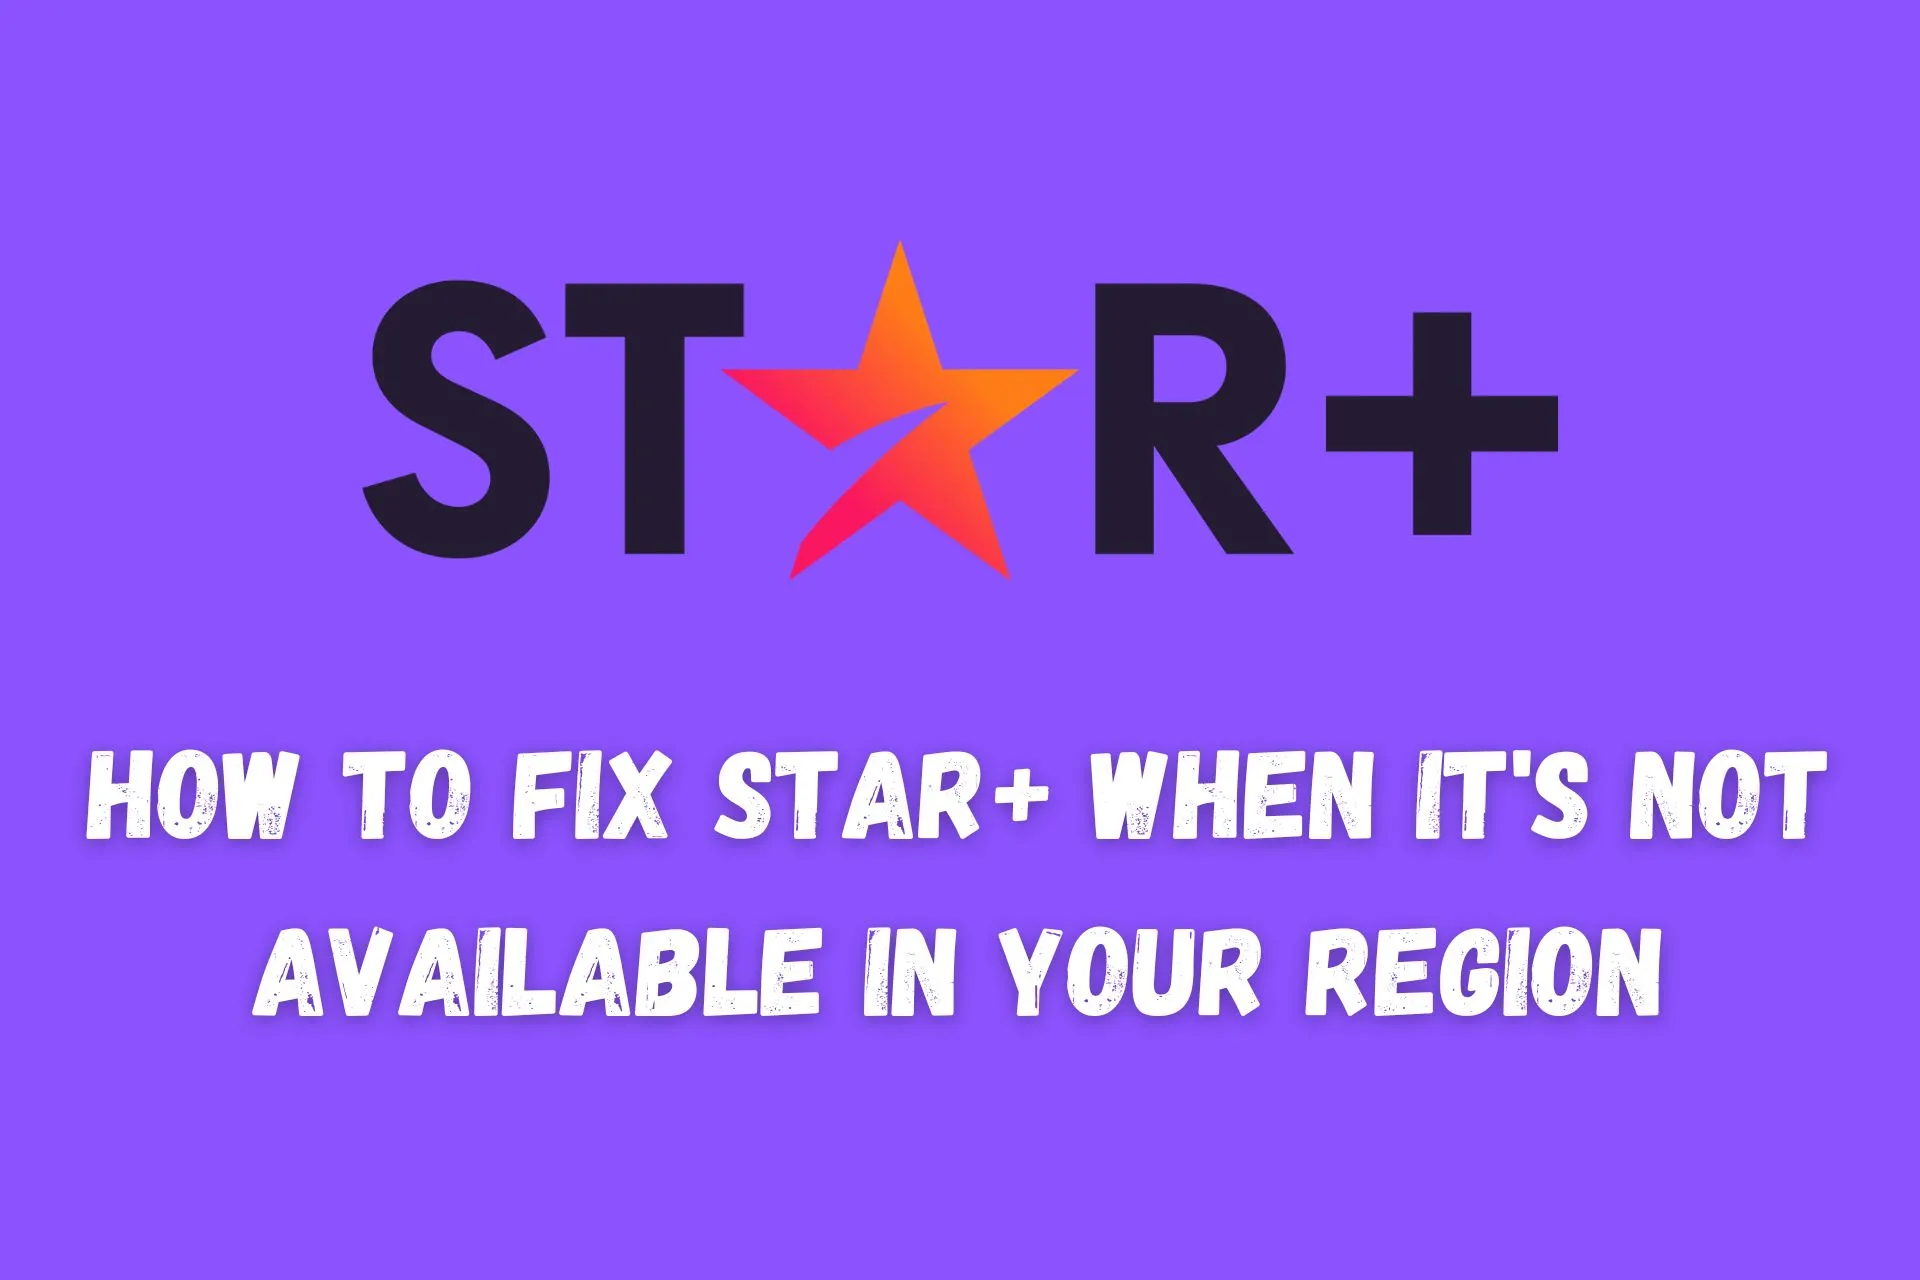 star+ is not available in your region